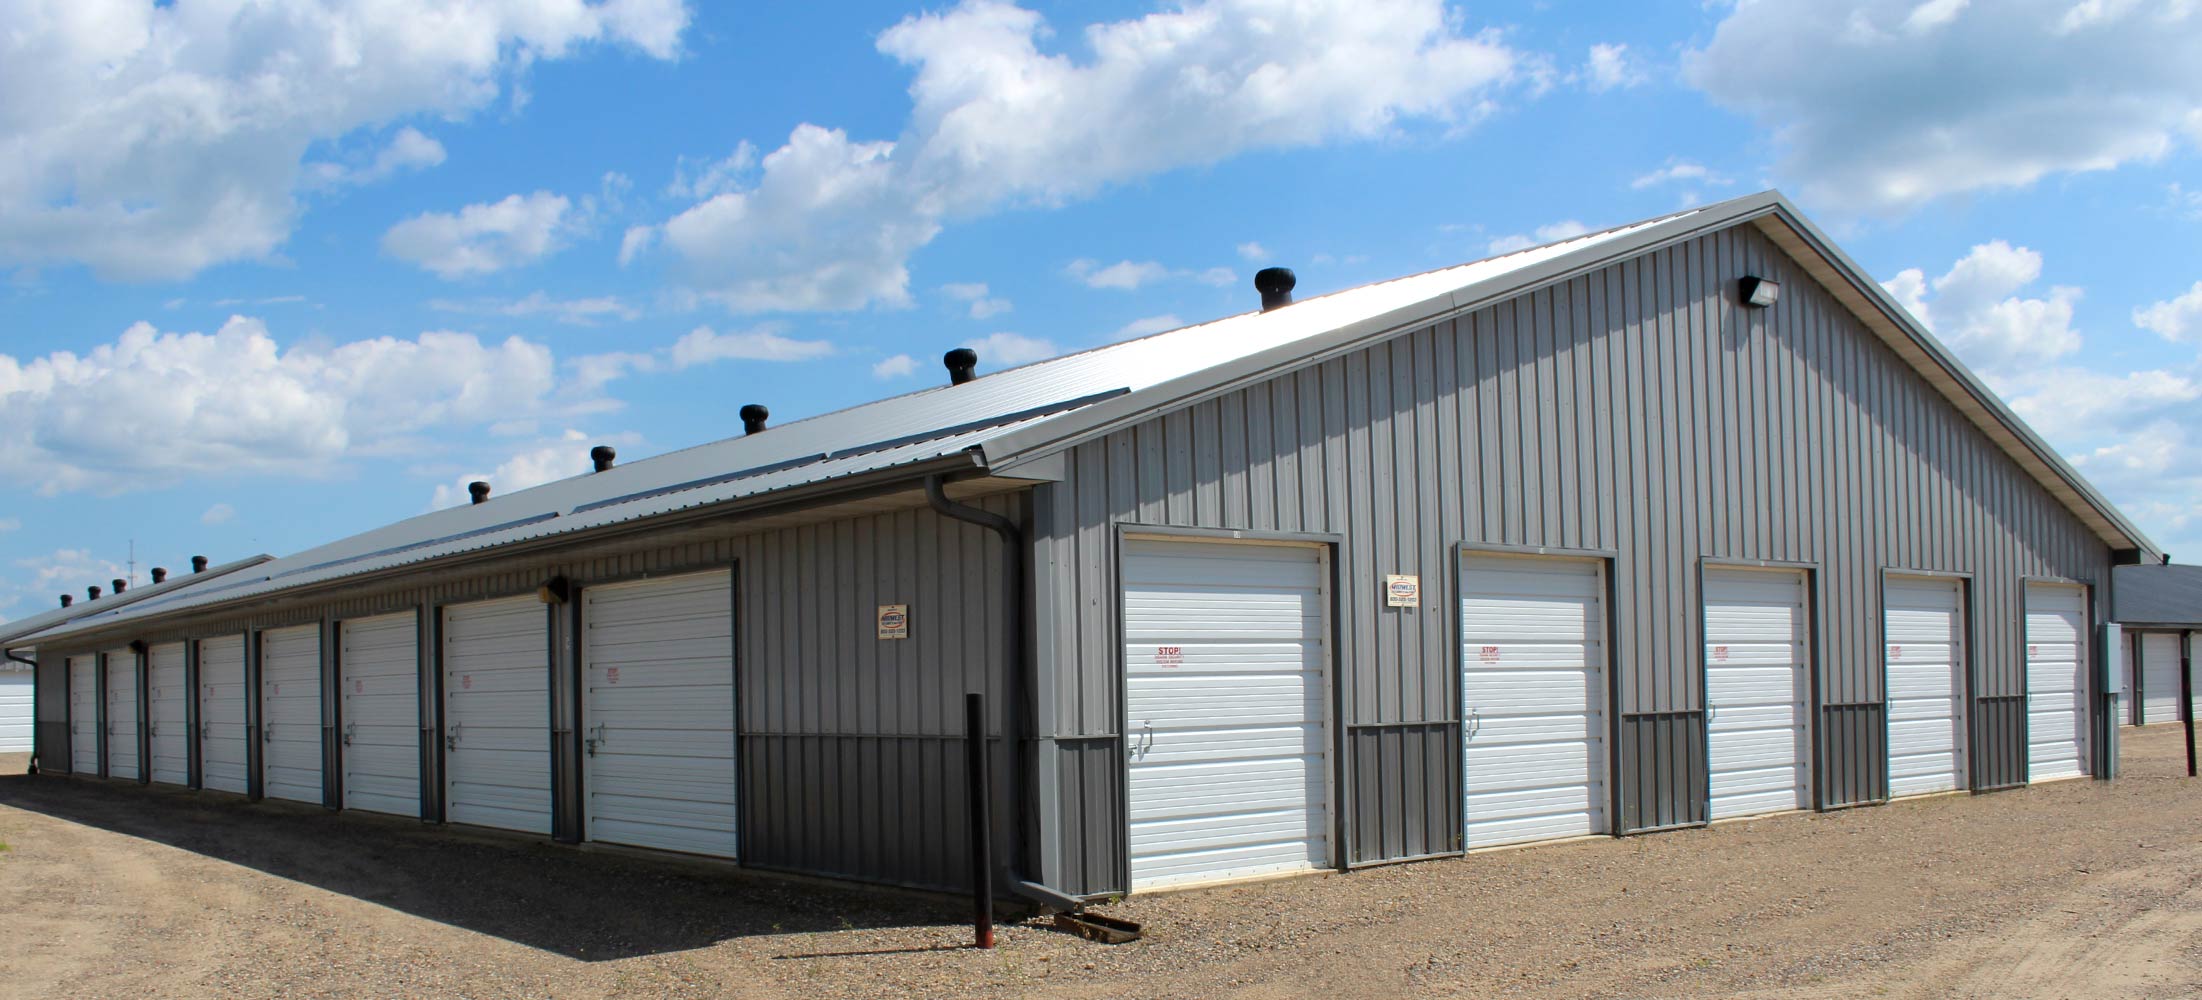 Side view of a Storage Unit at Strack's Self Storage in Randall, MN